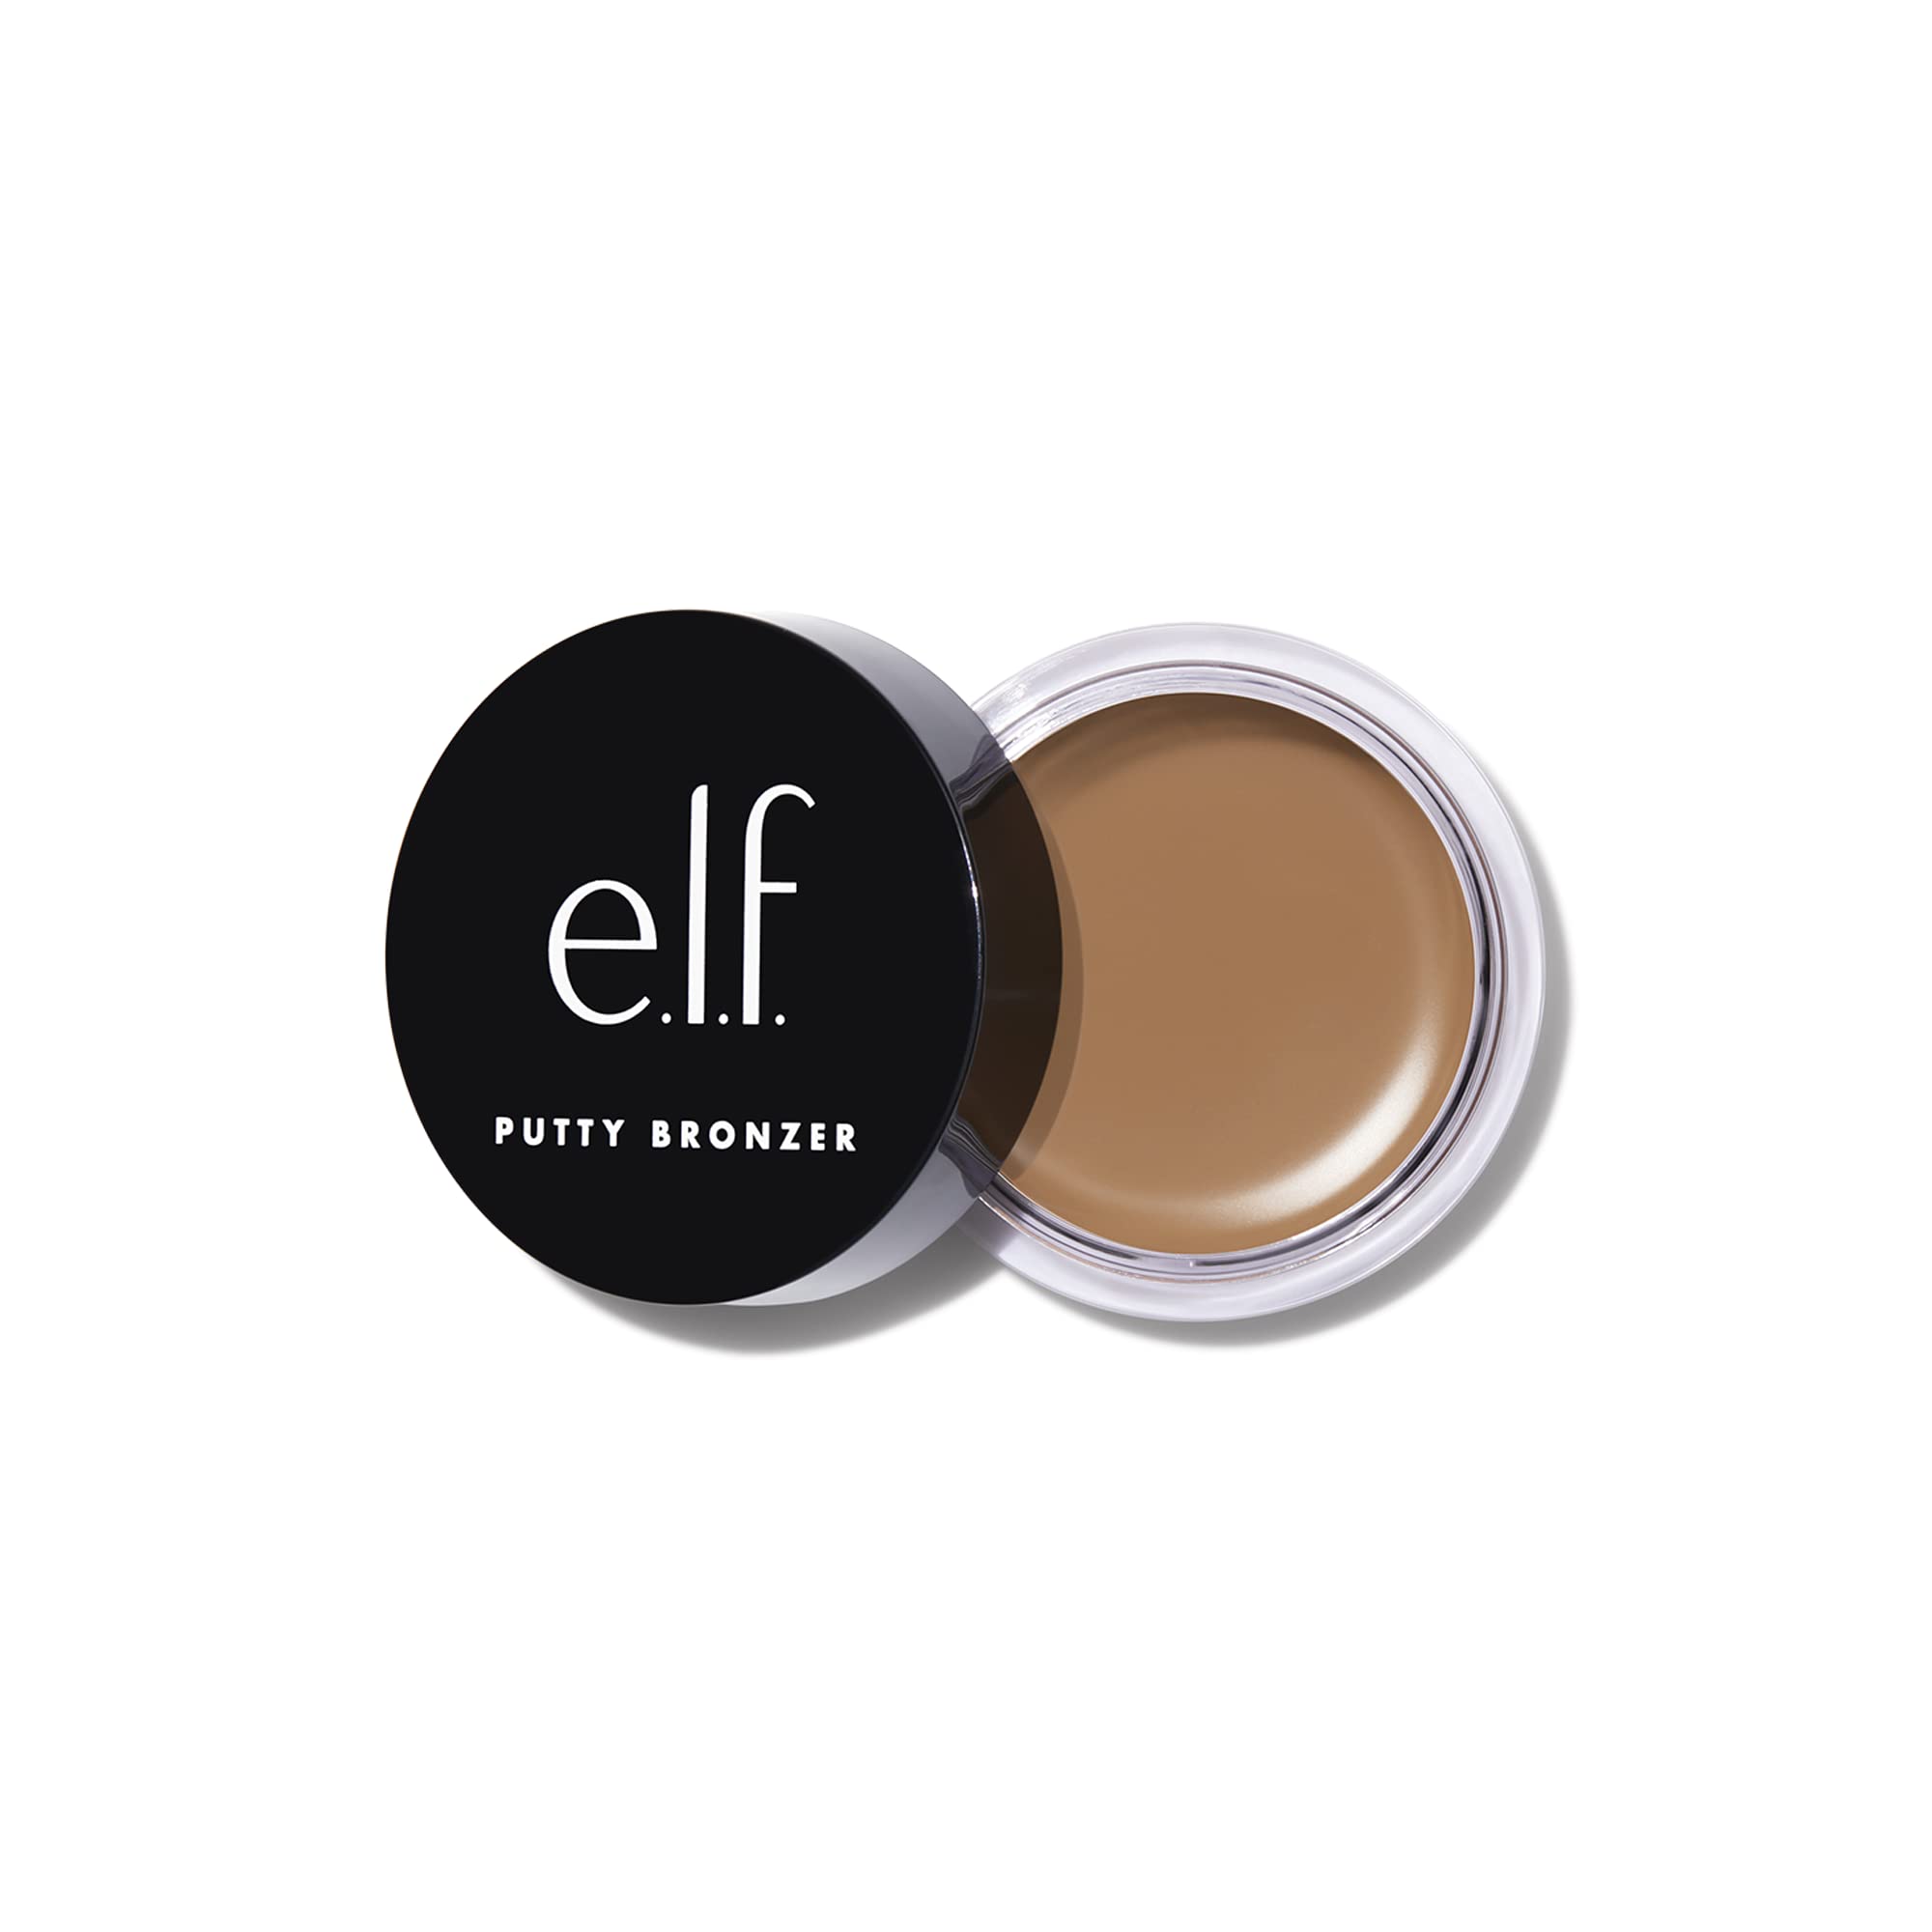 e.l.f. Putty Bronzer, Creamy & Highly Pigmented Formula, Creates a Long-Lasting Bronzed Glow, Infused with Argan Oil & Vitamin E, Tan Lines, 0.35 Oz